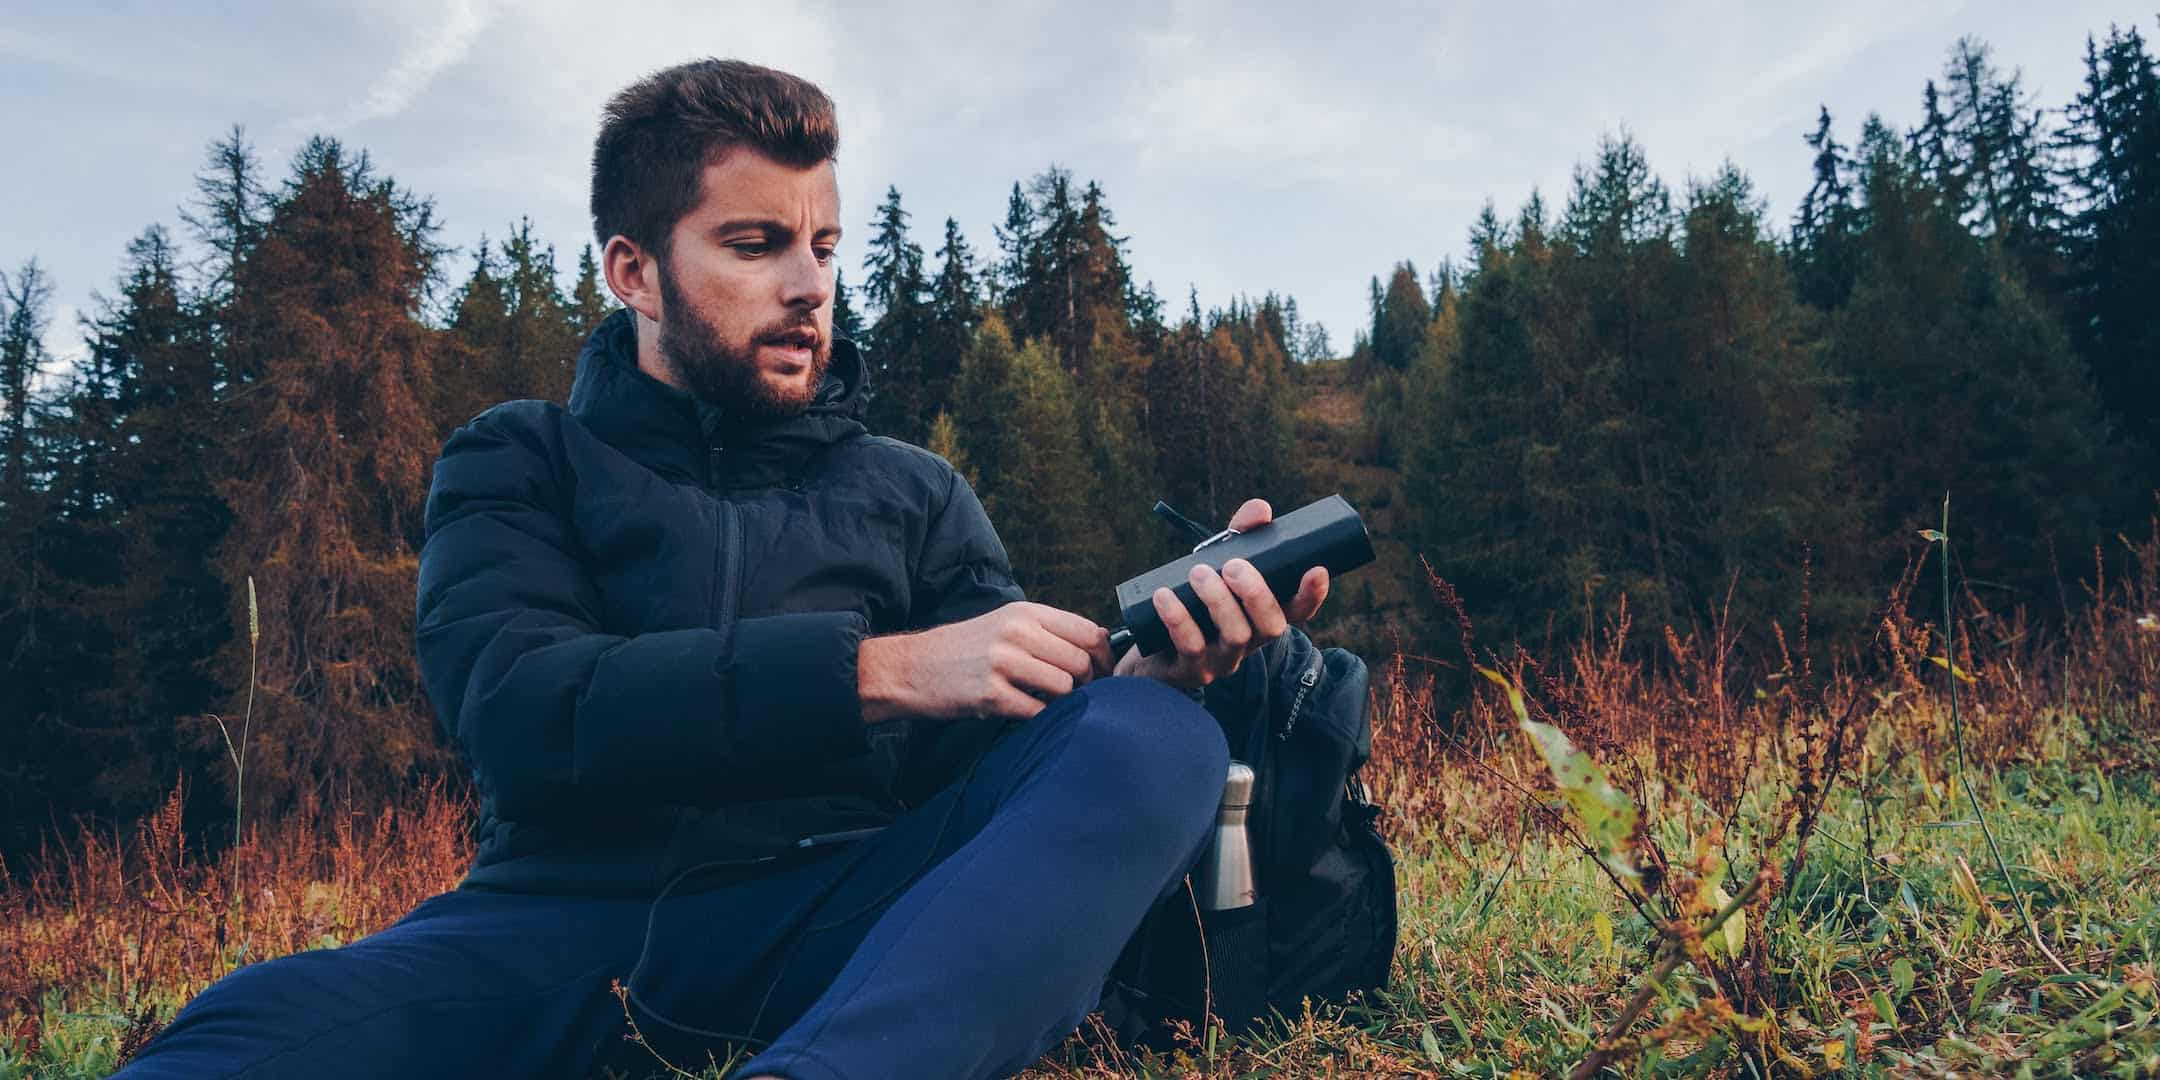 Sunslice Electron solar power bank charging a man's smartphone during camping